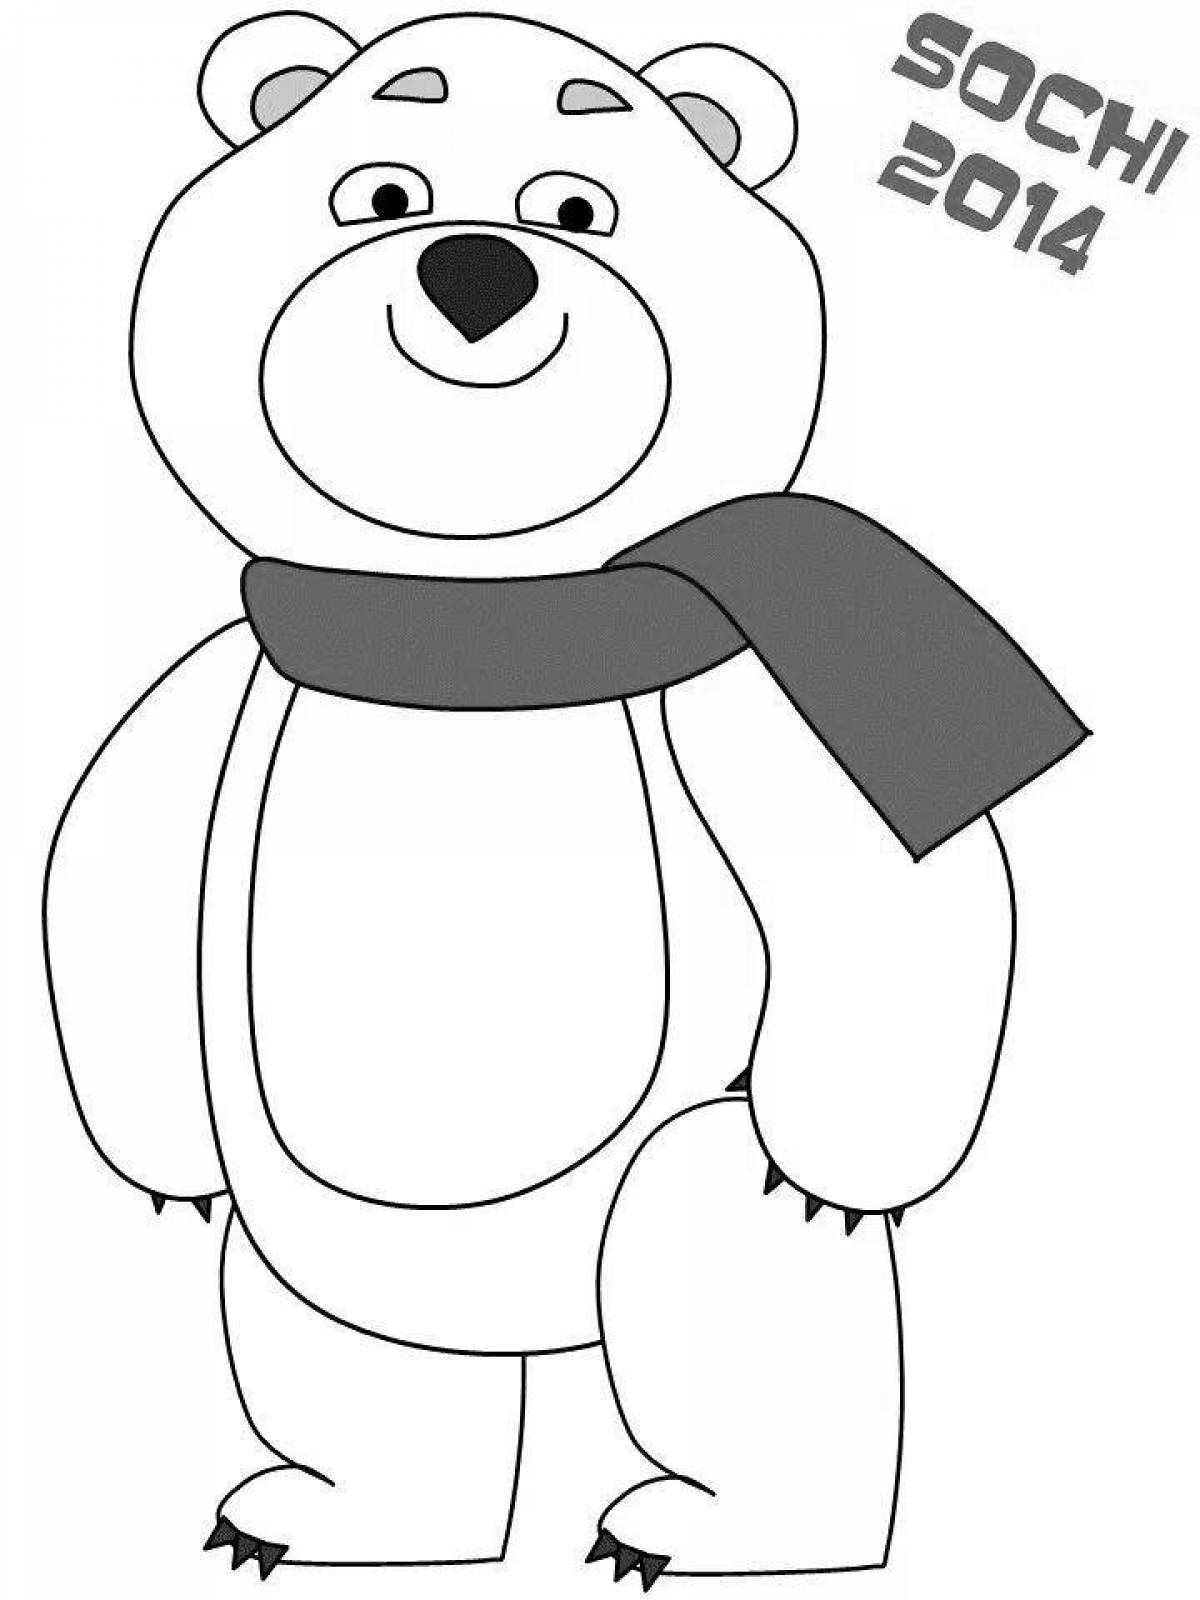 Coloring page funny olympic bear